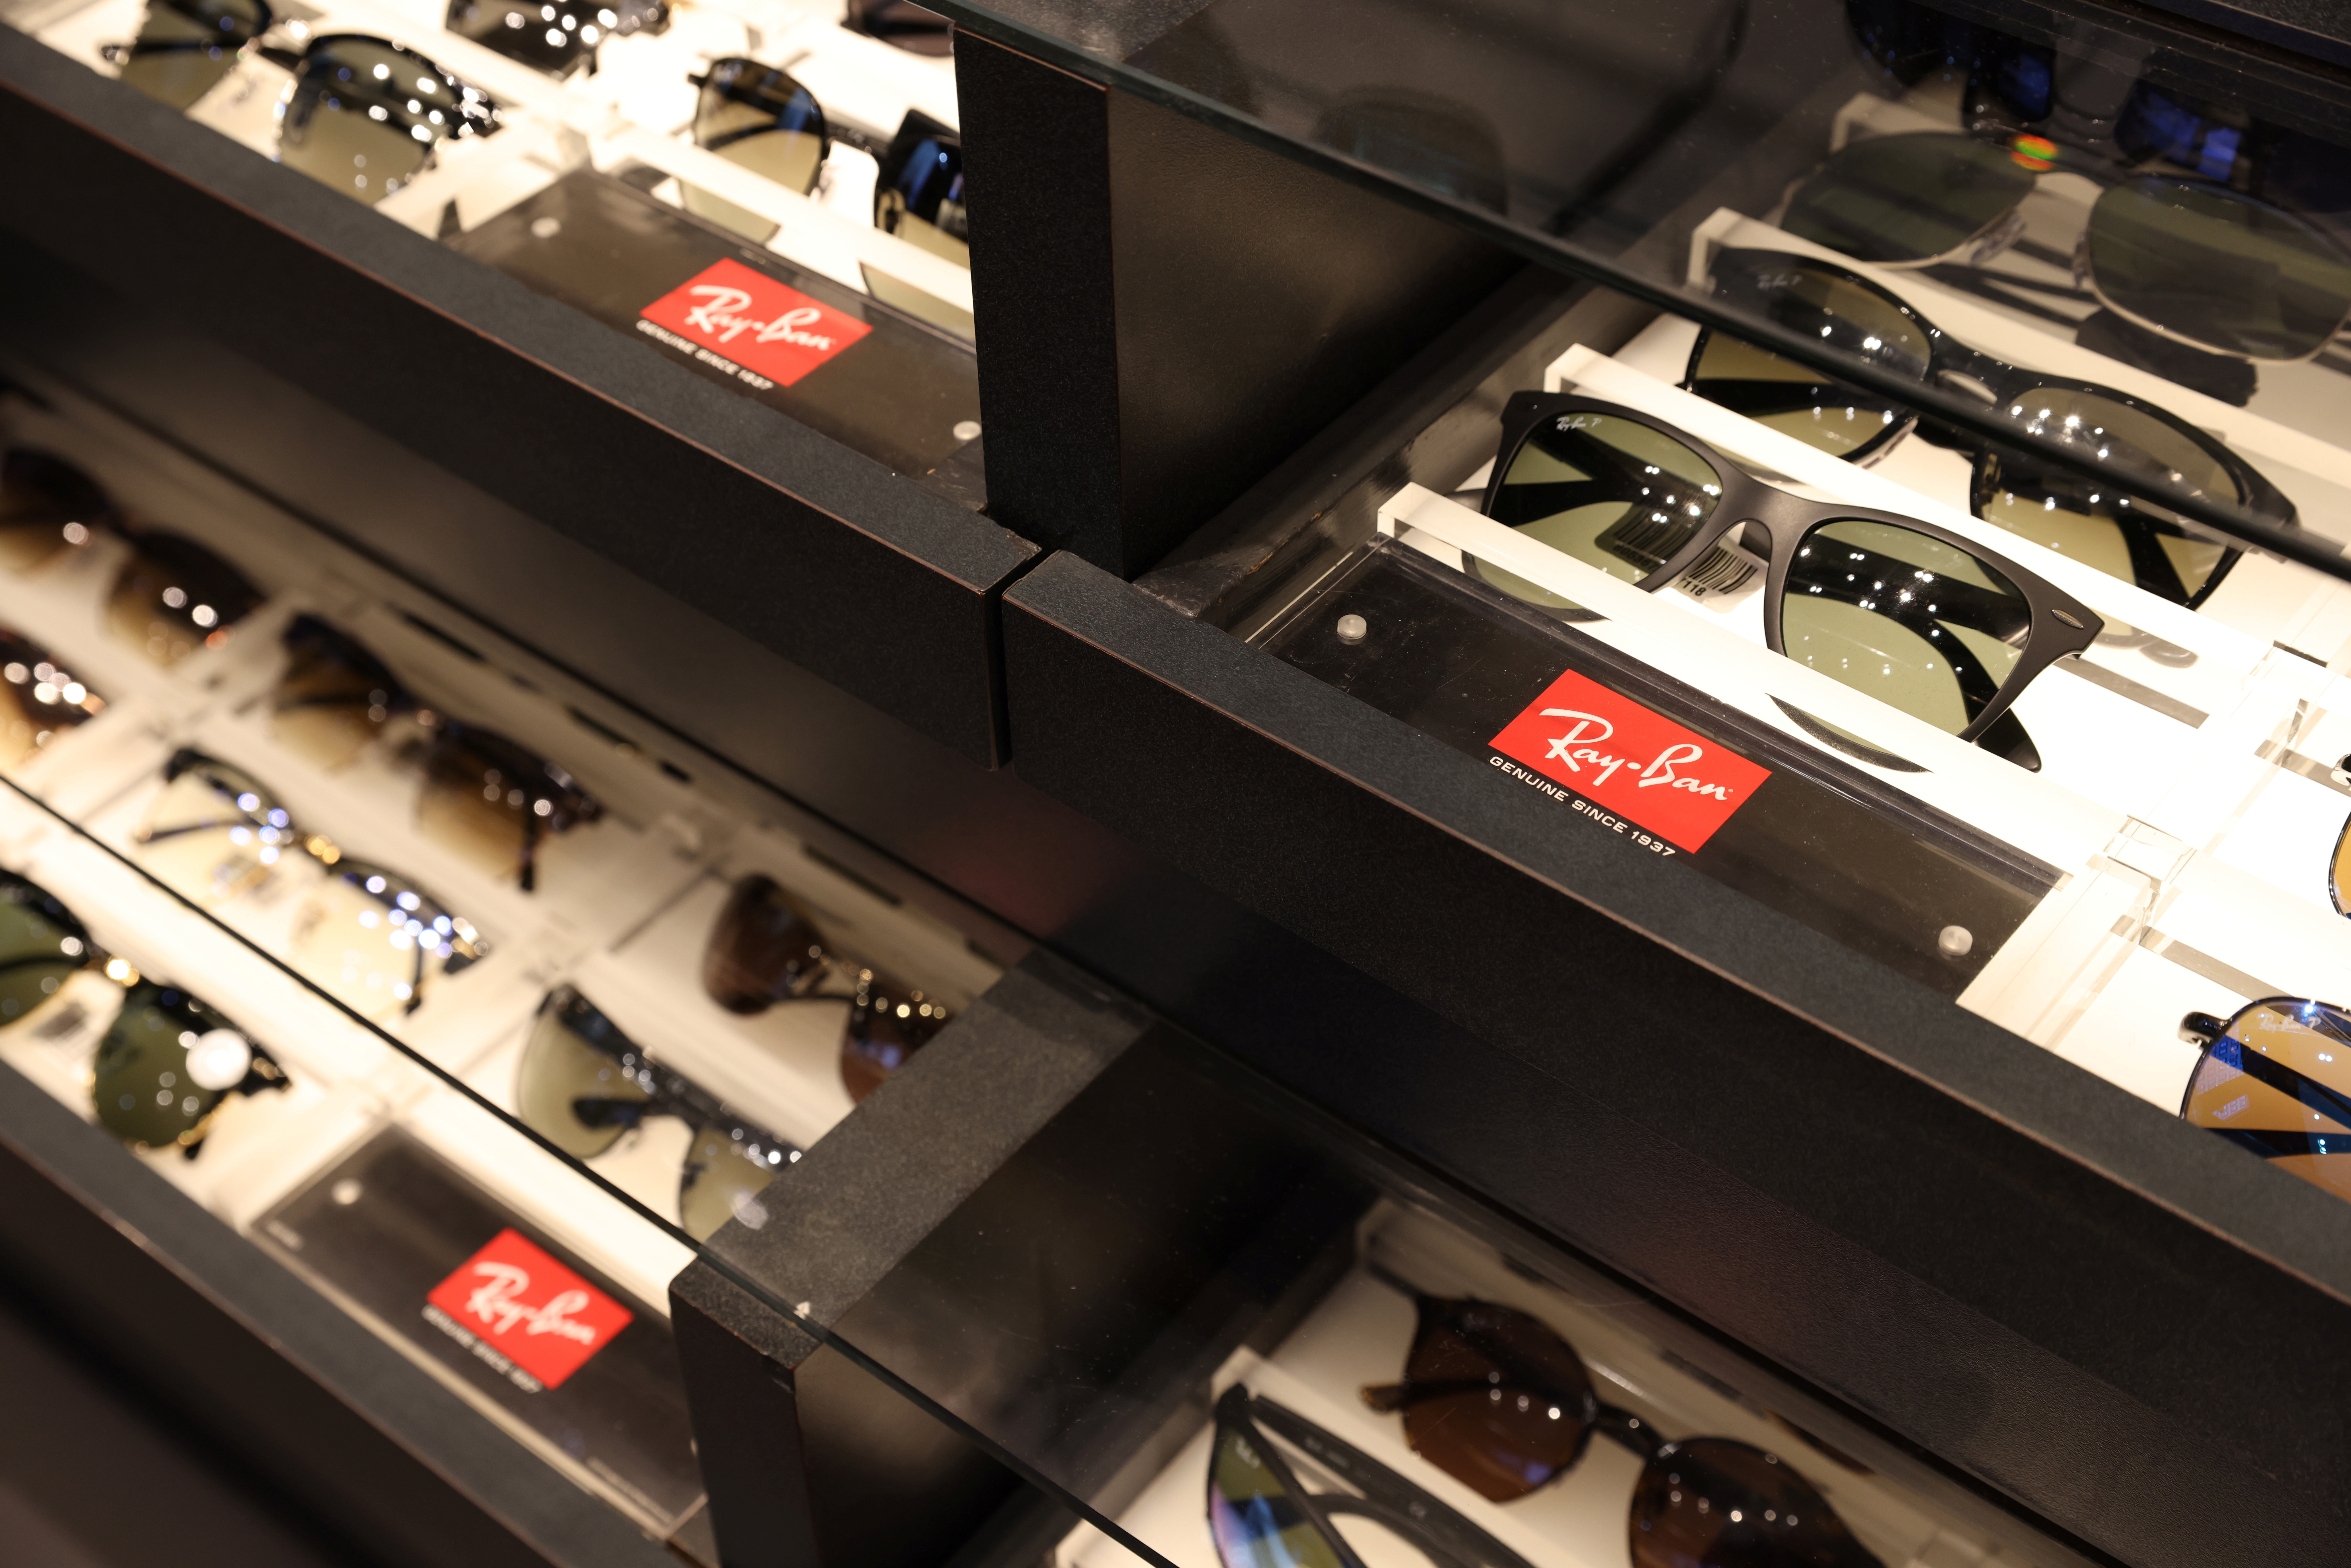 Ray-Ban maker EssilorLuxottica sees Americas sales growth slow | Reuters